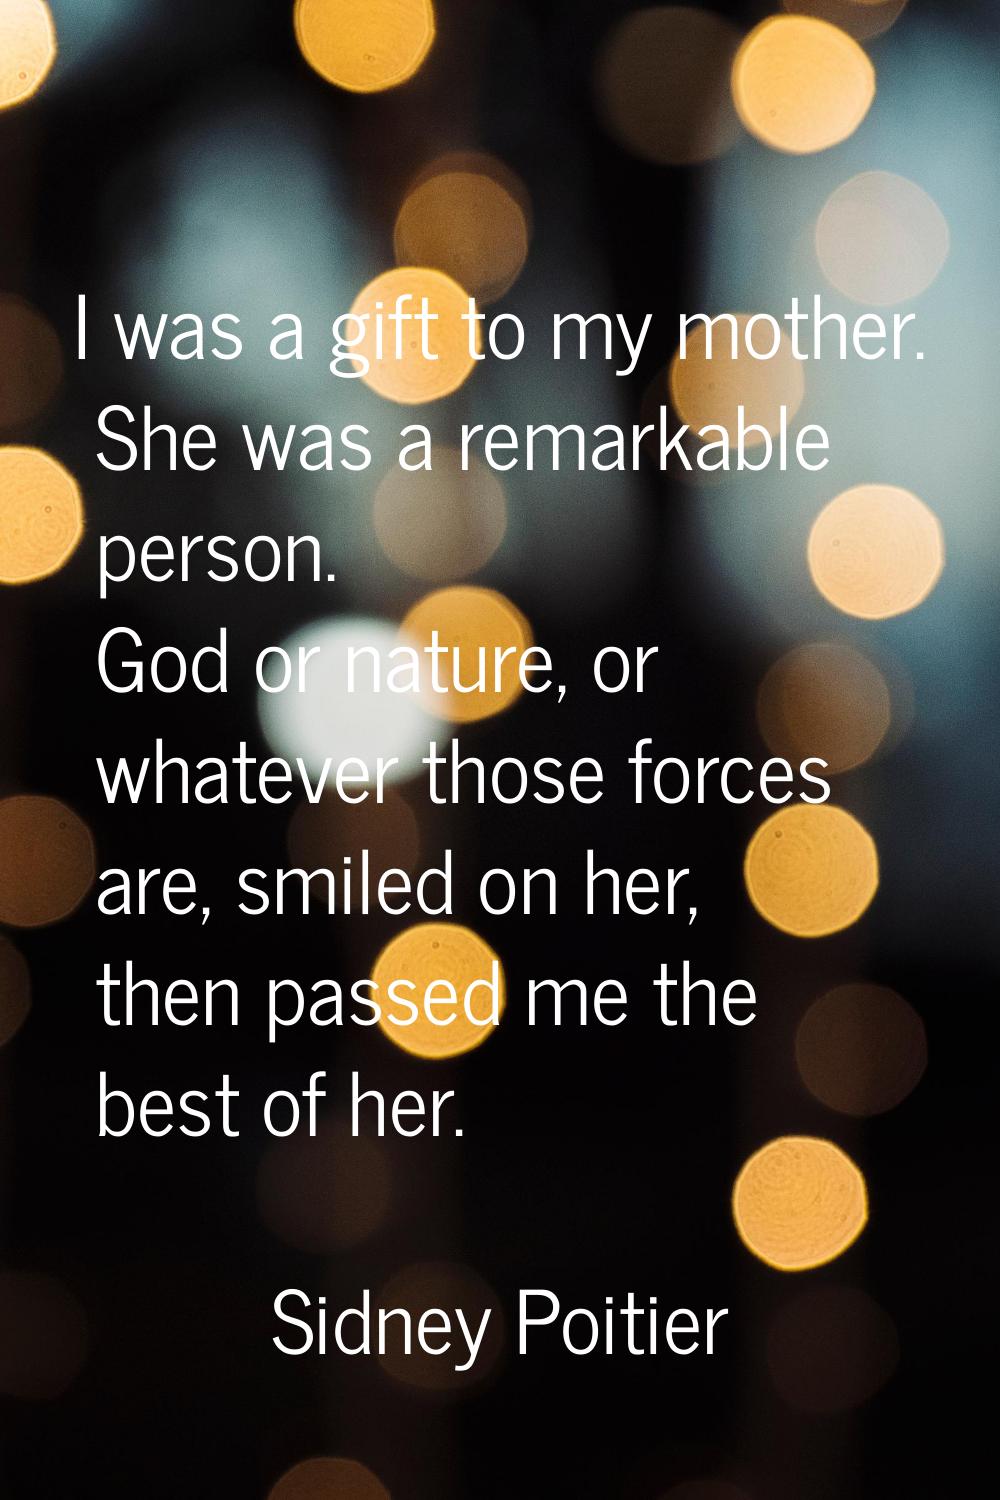 I was a gift to my mother. She was a remarkable person. God or nature, or whatever those forces are